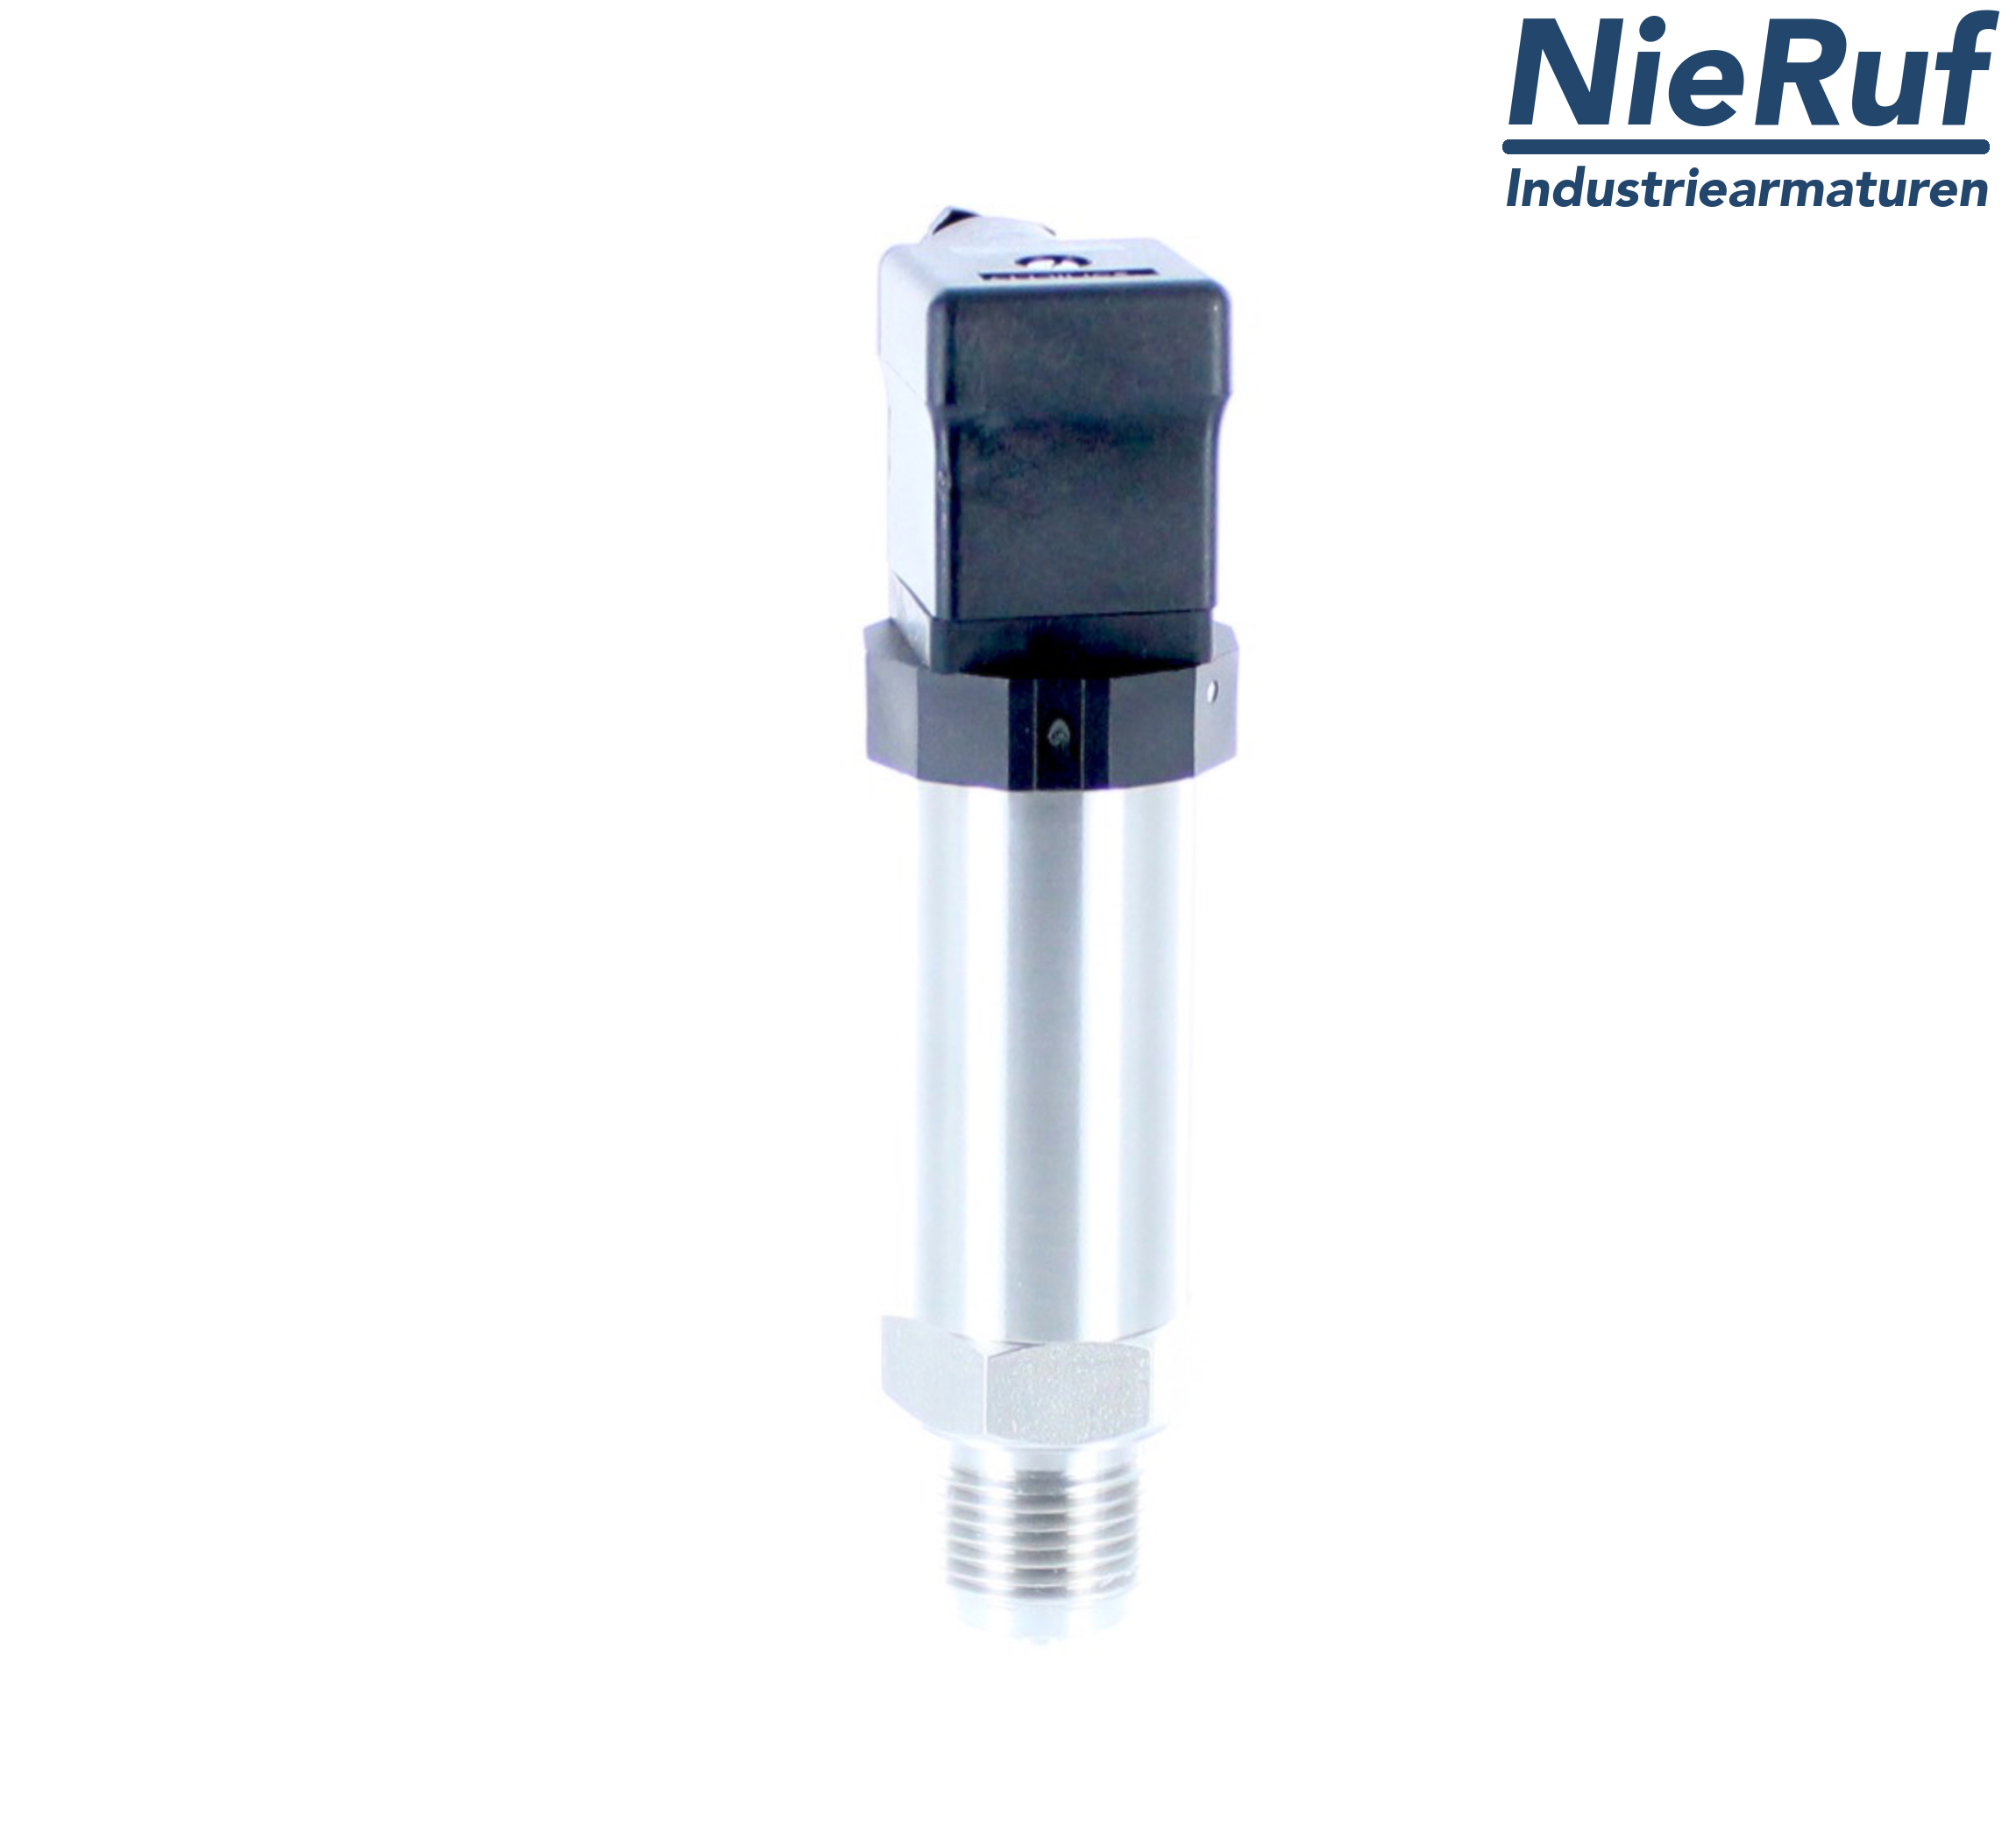 pressure sensor G 1/4" B DS01 stainless steel 2-wire: 4-20mA FPM 0,0 - 400,0 bar